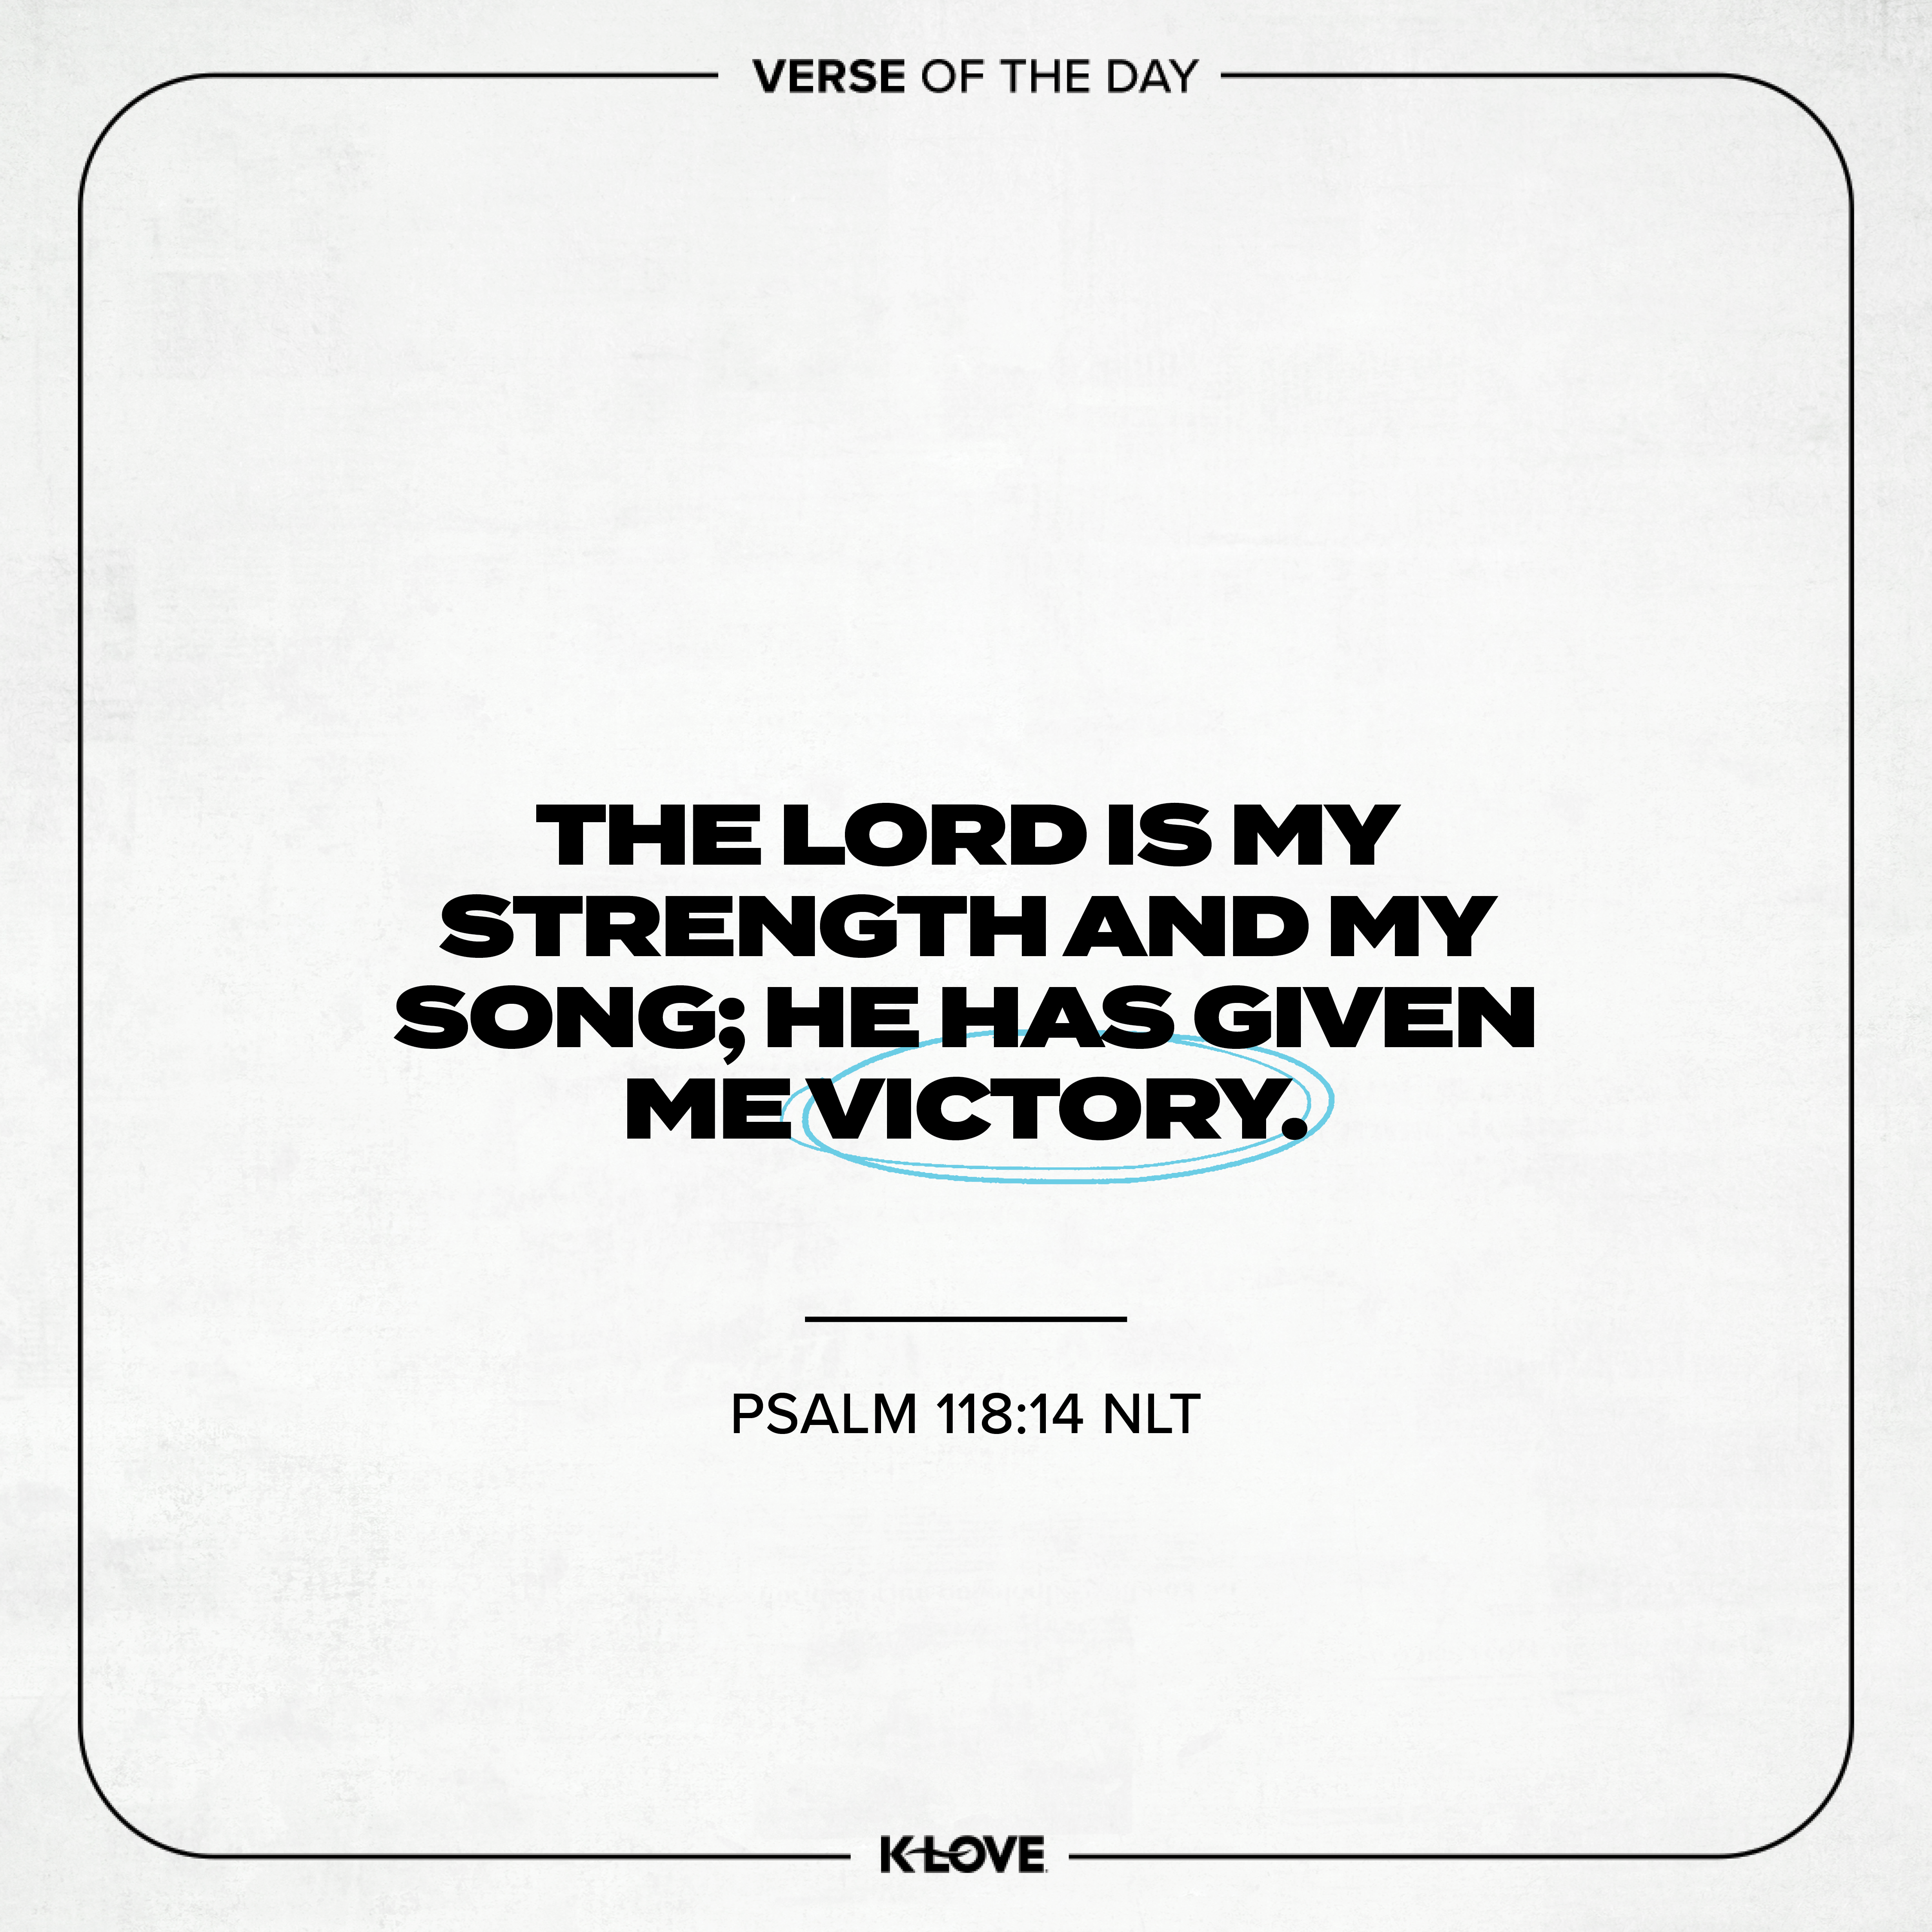 The LORD is my strength and my song; He has given me victory.